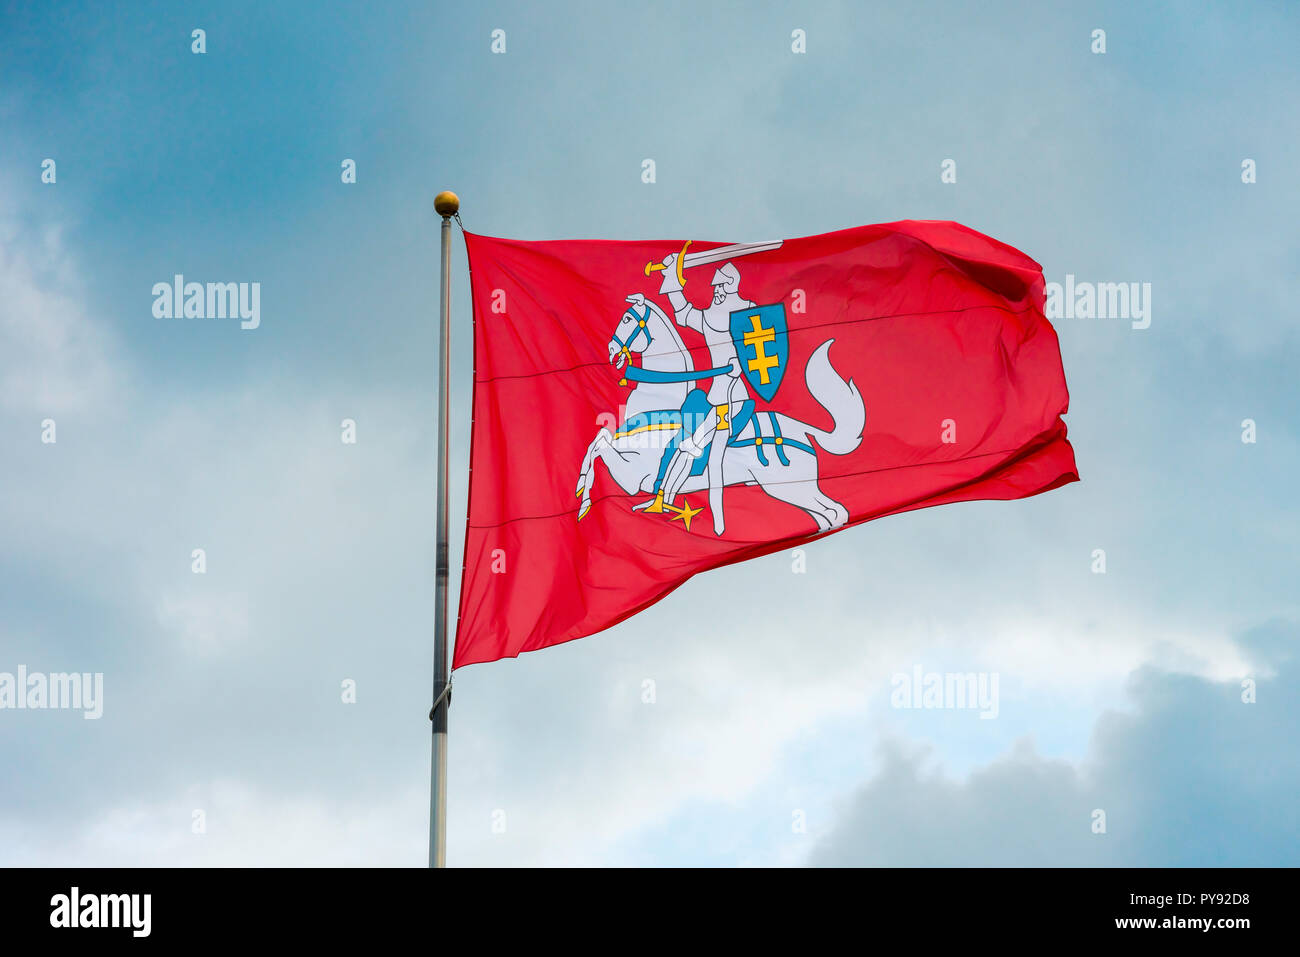 Lithuania flag, view of the Lithuanian state flag showing a white knight  riding a white horse on a red background, Vilnius Stock Photo - Alamy